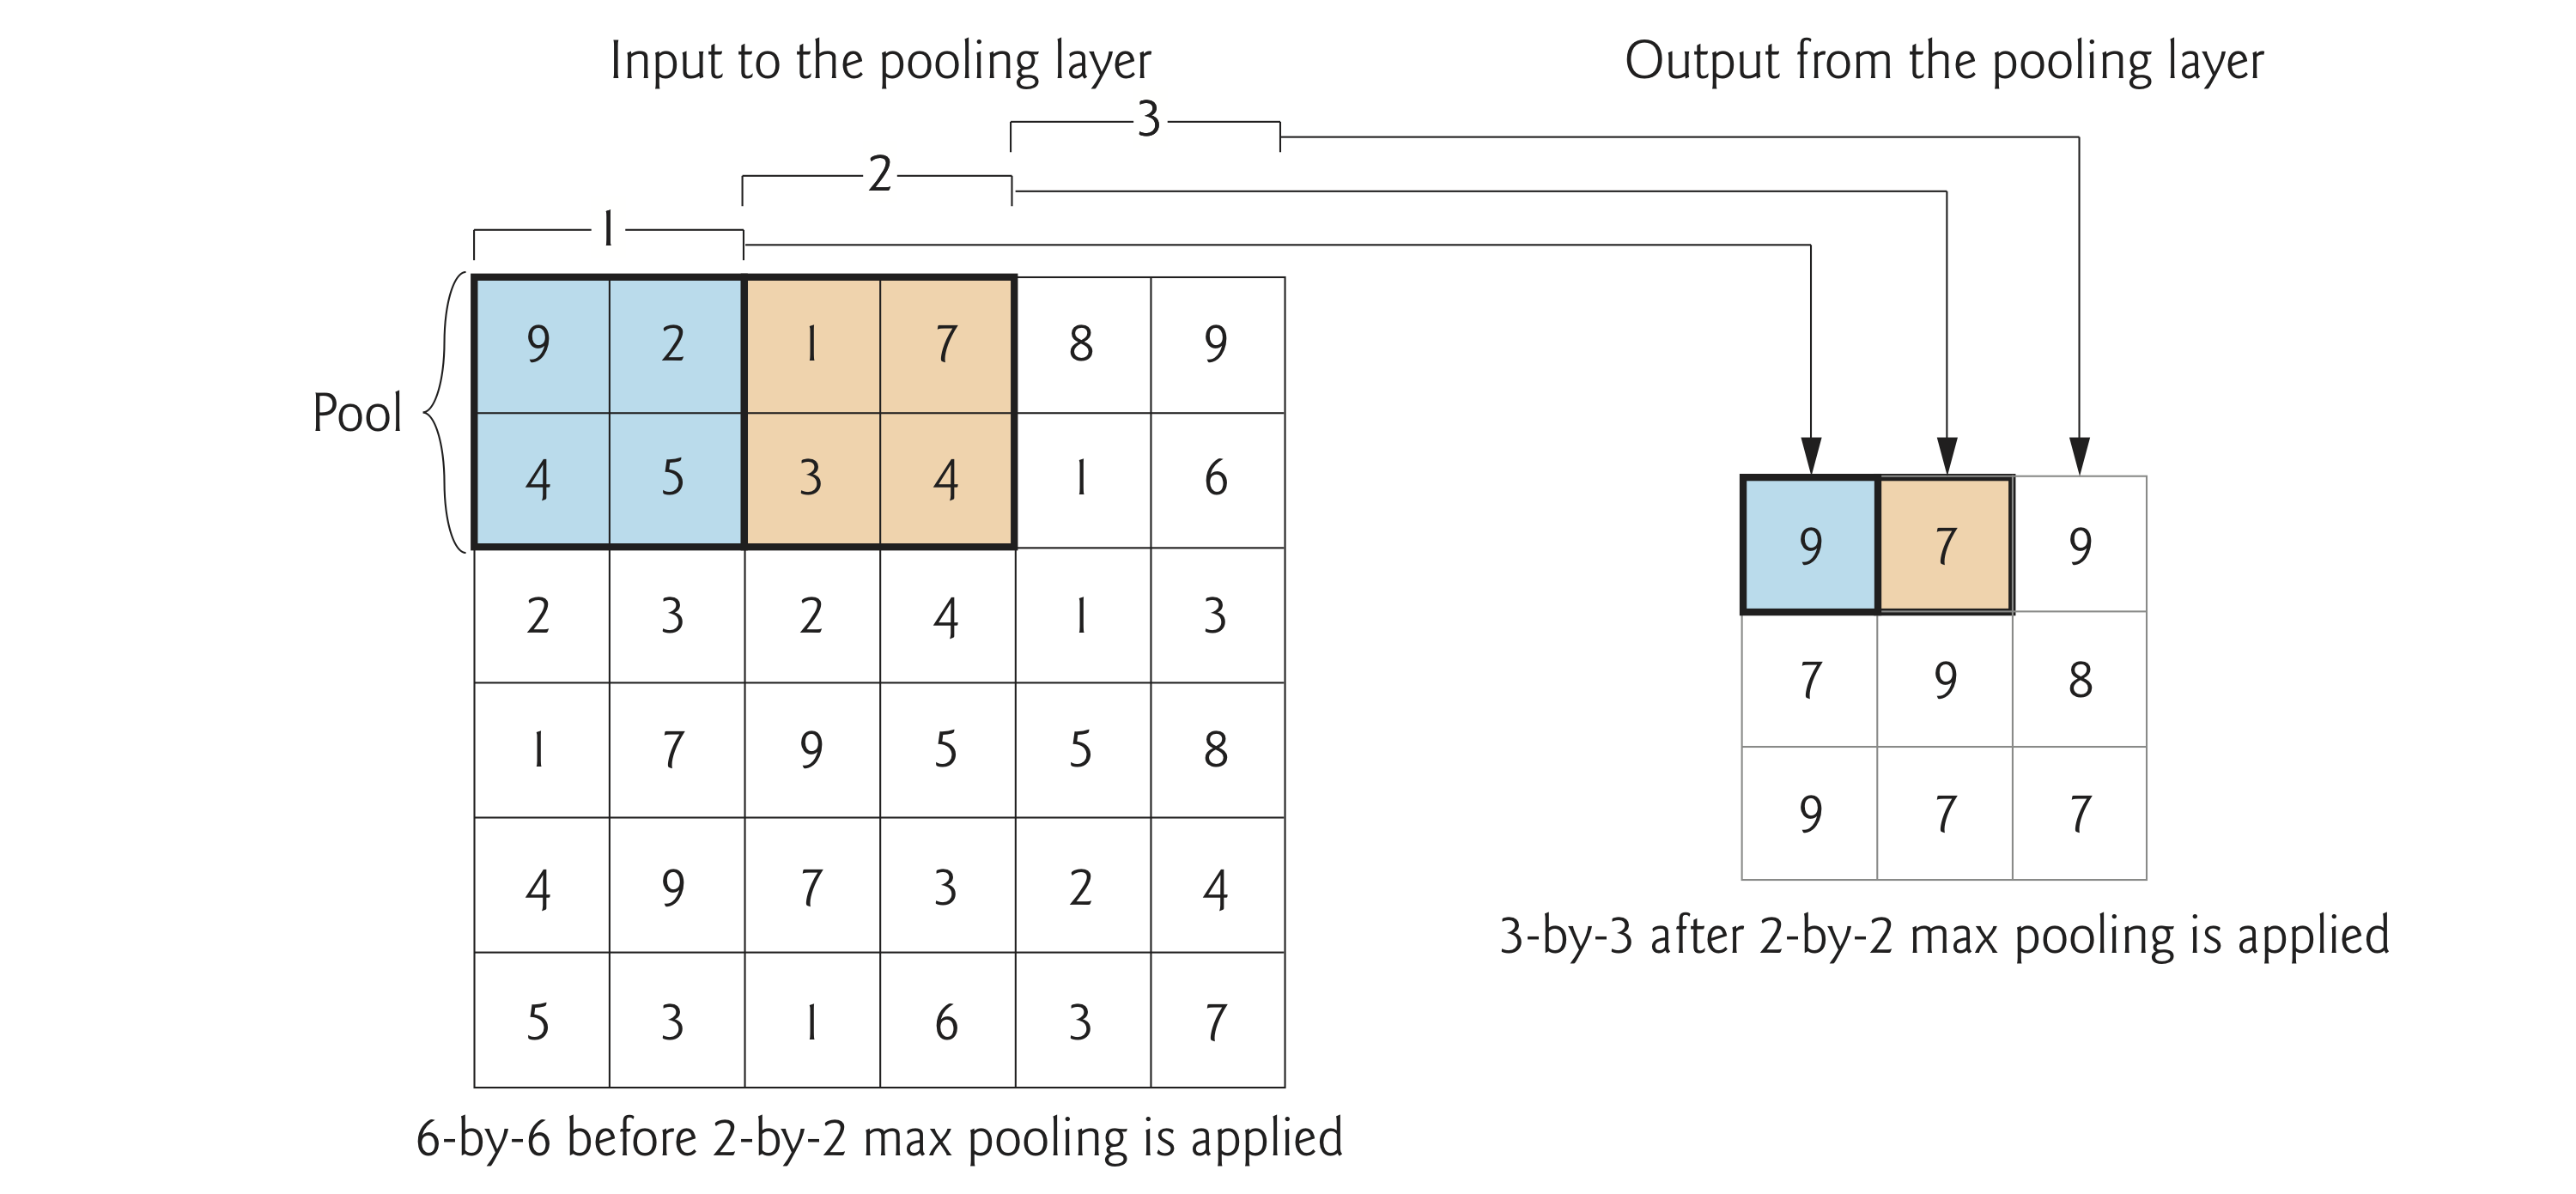 Max pooling diagram showing the 6-by-6 set of numeric values we wish to compress with the 2-by-2 blue square in position 1 representing the initial pool of features to examine, and the 3-by-3 square representing the results of max pooling